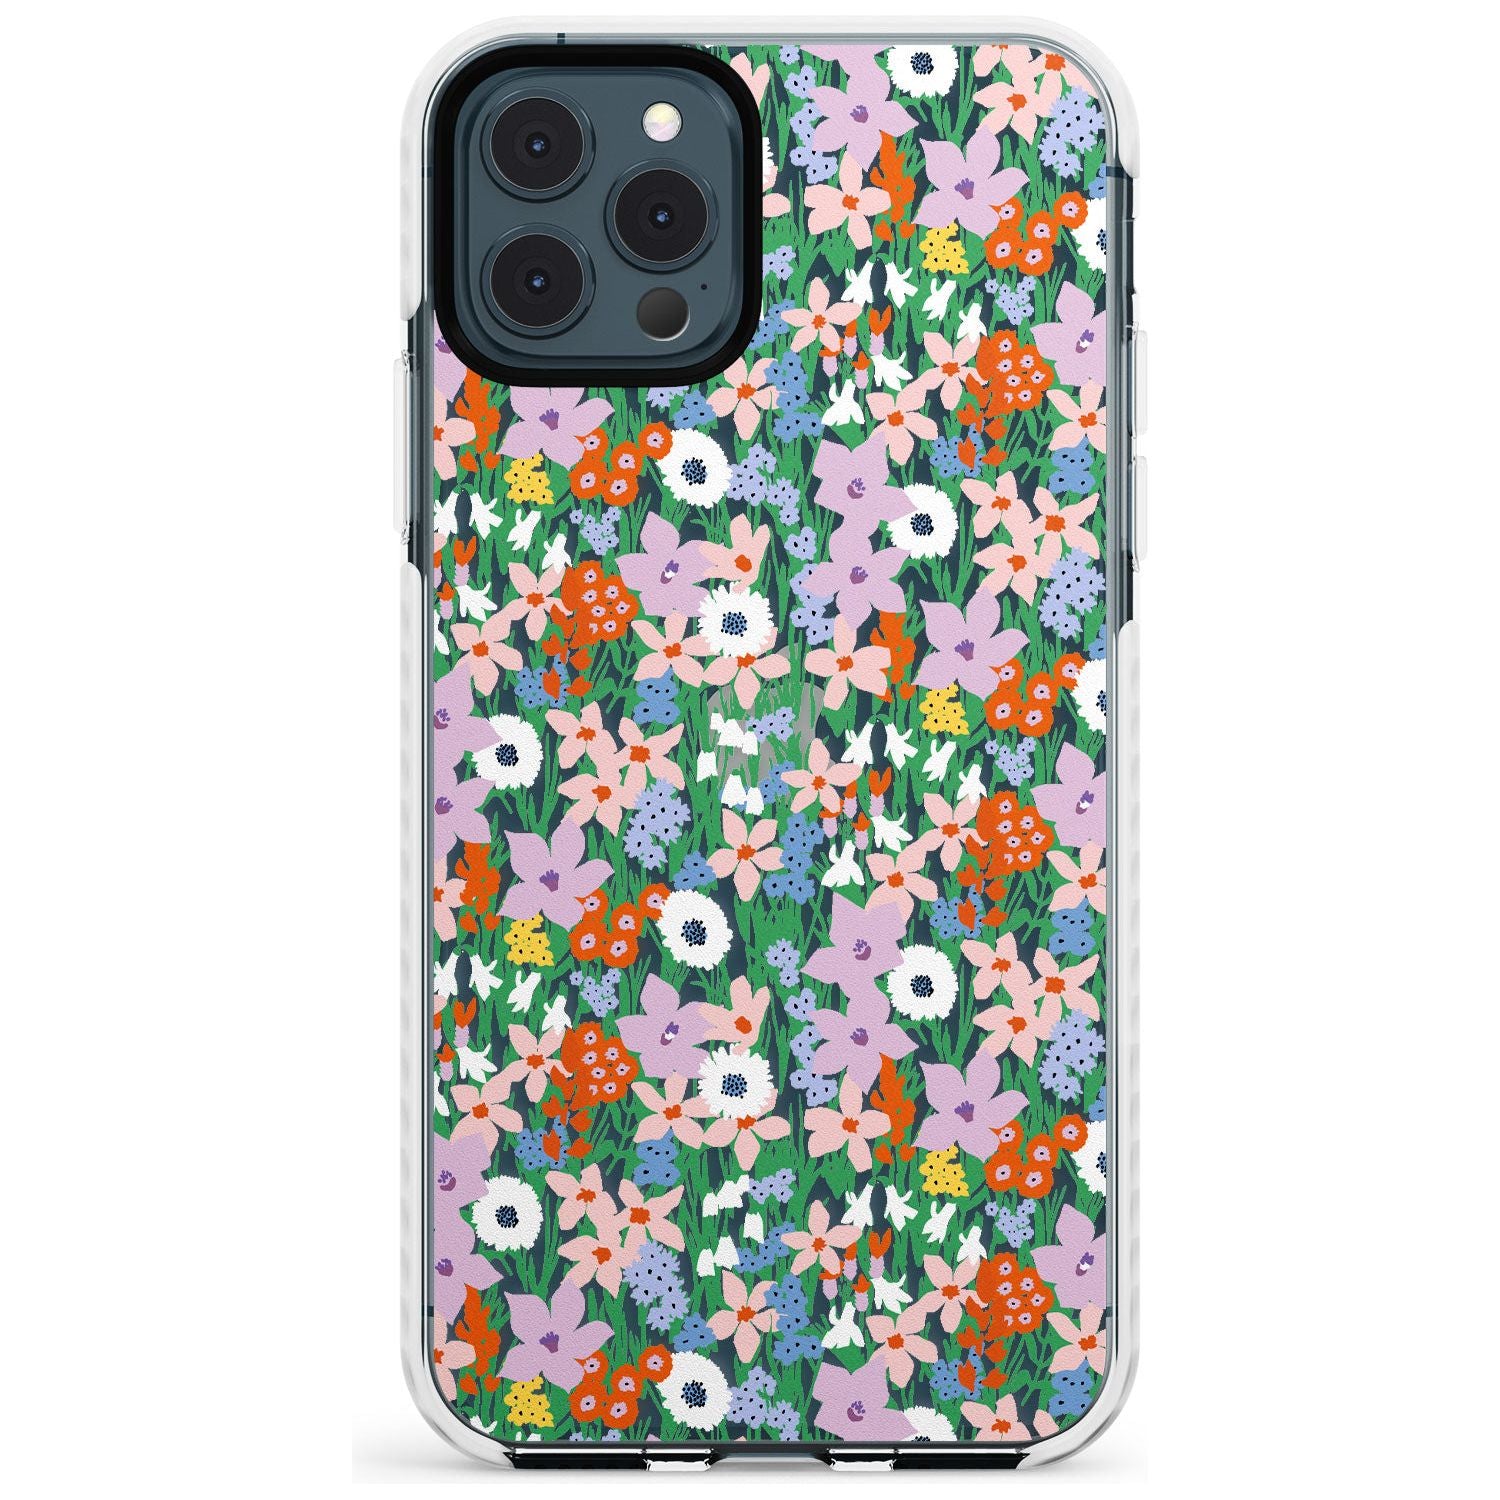 Jazzy Floral Mix: Transparent Slim TPU Phone Case for iPhone 11 Pro Max